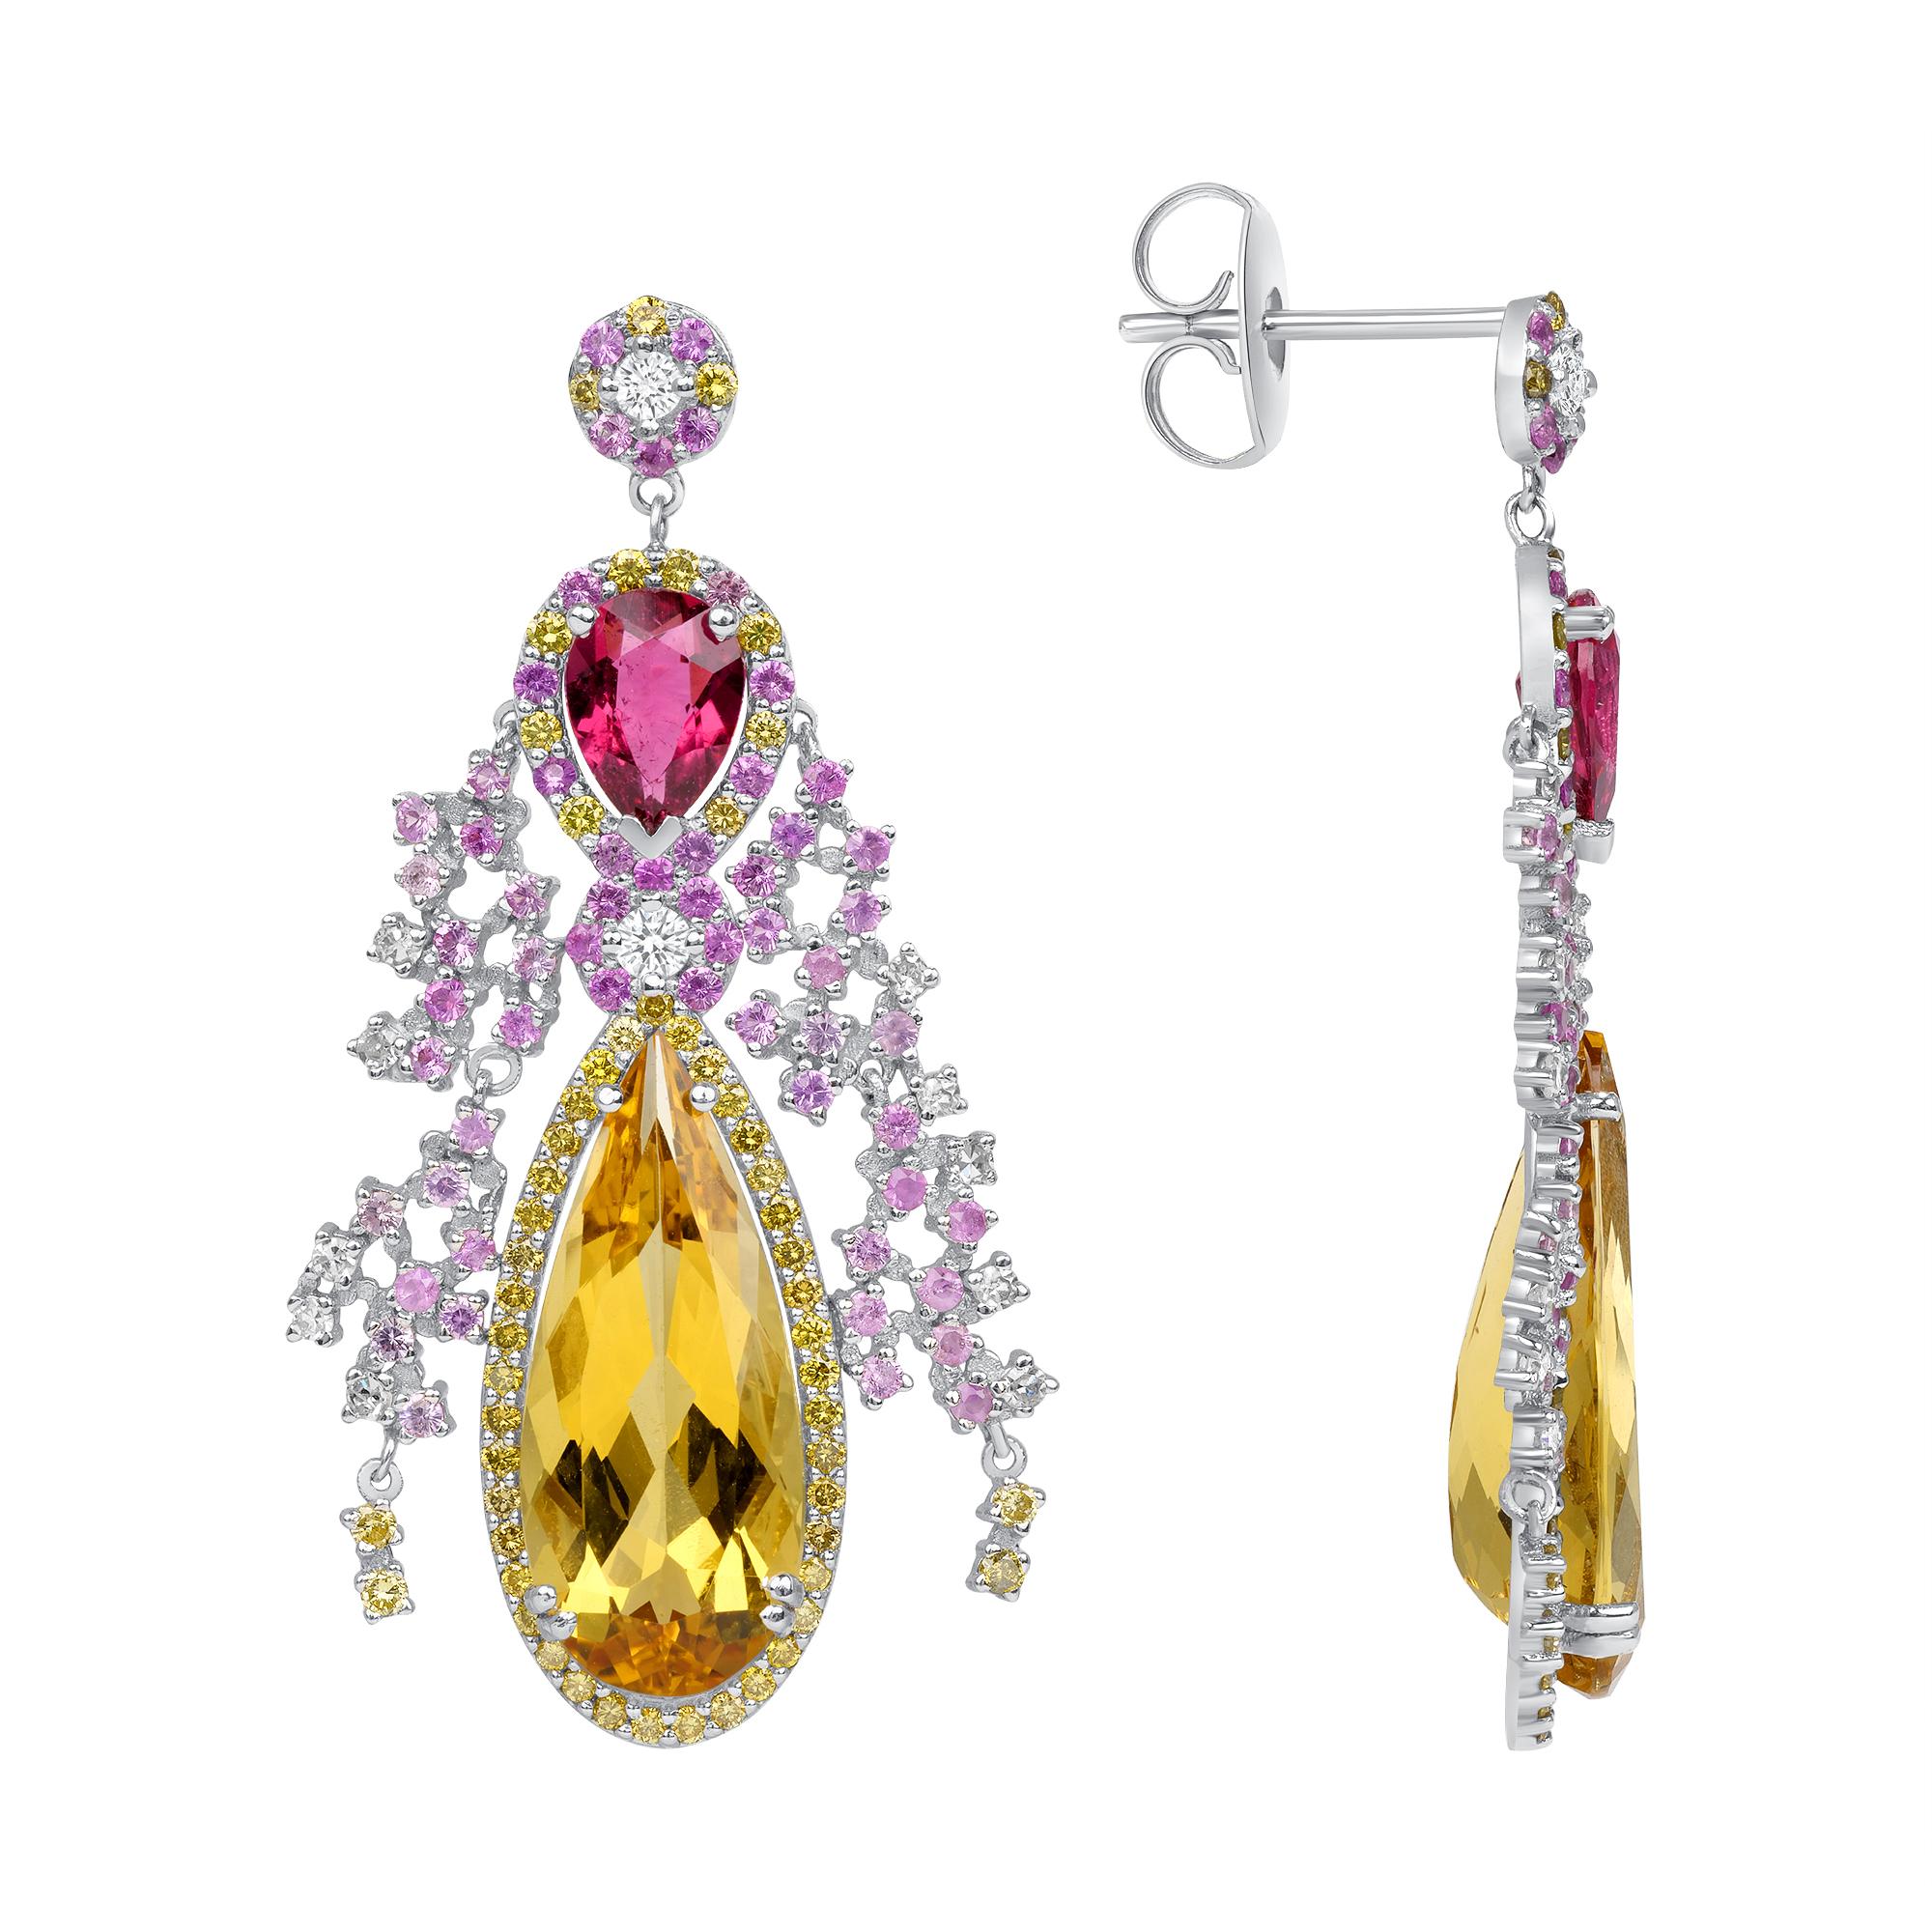 These are one-of-a-kind, hand-fabricated earrings with 8.11 carats of hand-cut 19-millimeter by 8-millimeter yellow beryl pears from Idar Oberstein, Germany. They also feature 1.3 carats of specially cut 7-millimeter by 5-millimeter rubellite pears,